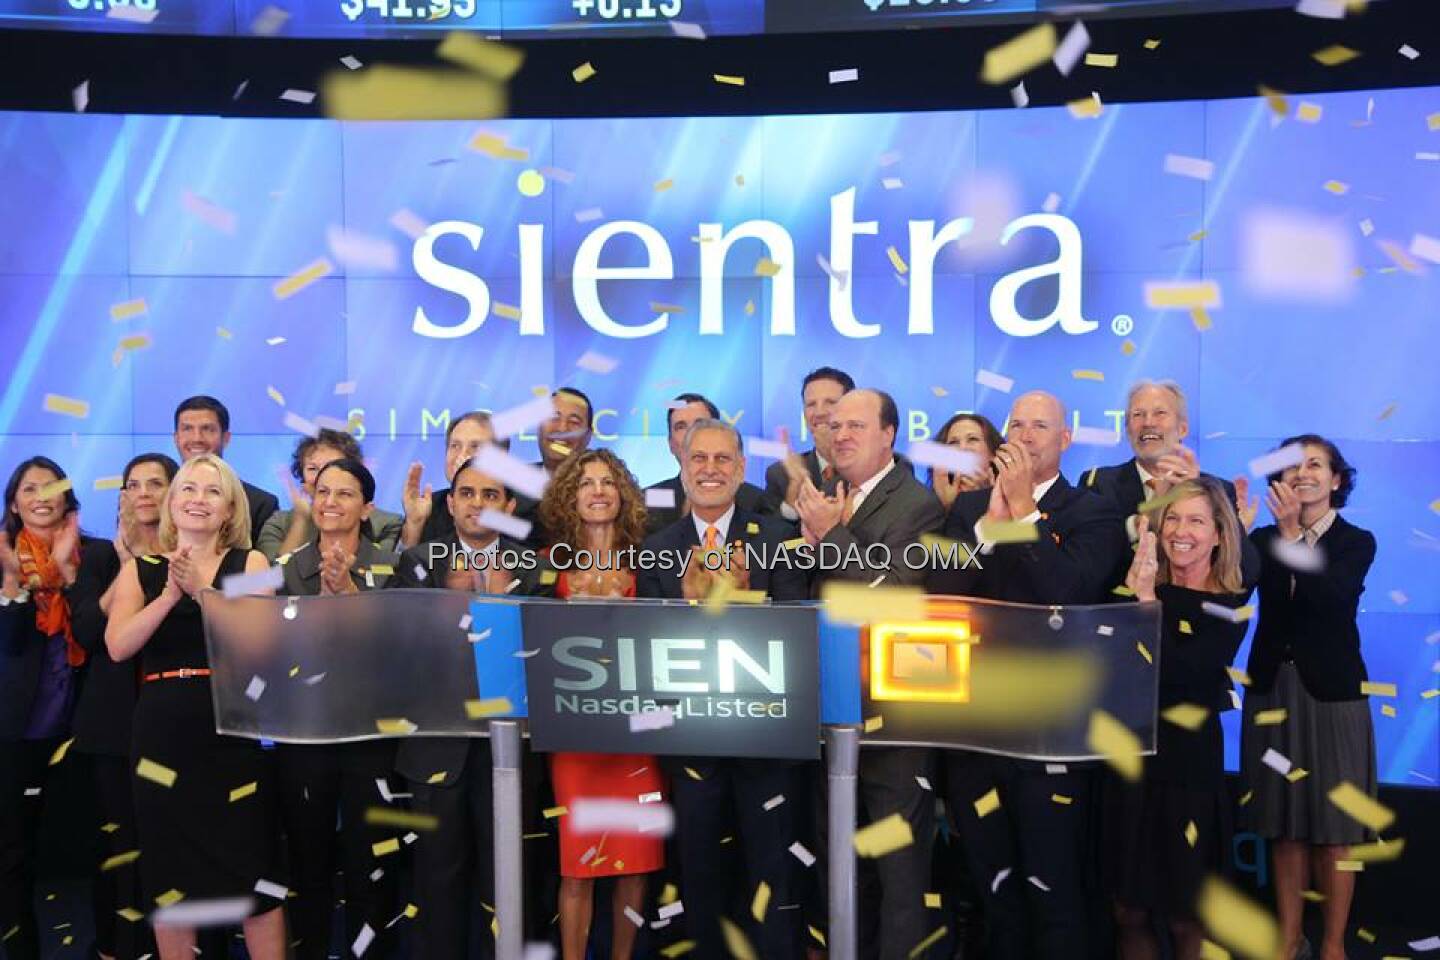 Great photos of Sientra ringing the #Nasdaq Opening Bell in celebration of #IPO today! $SIEN  Source: http://facebook.com/NASDAQ